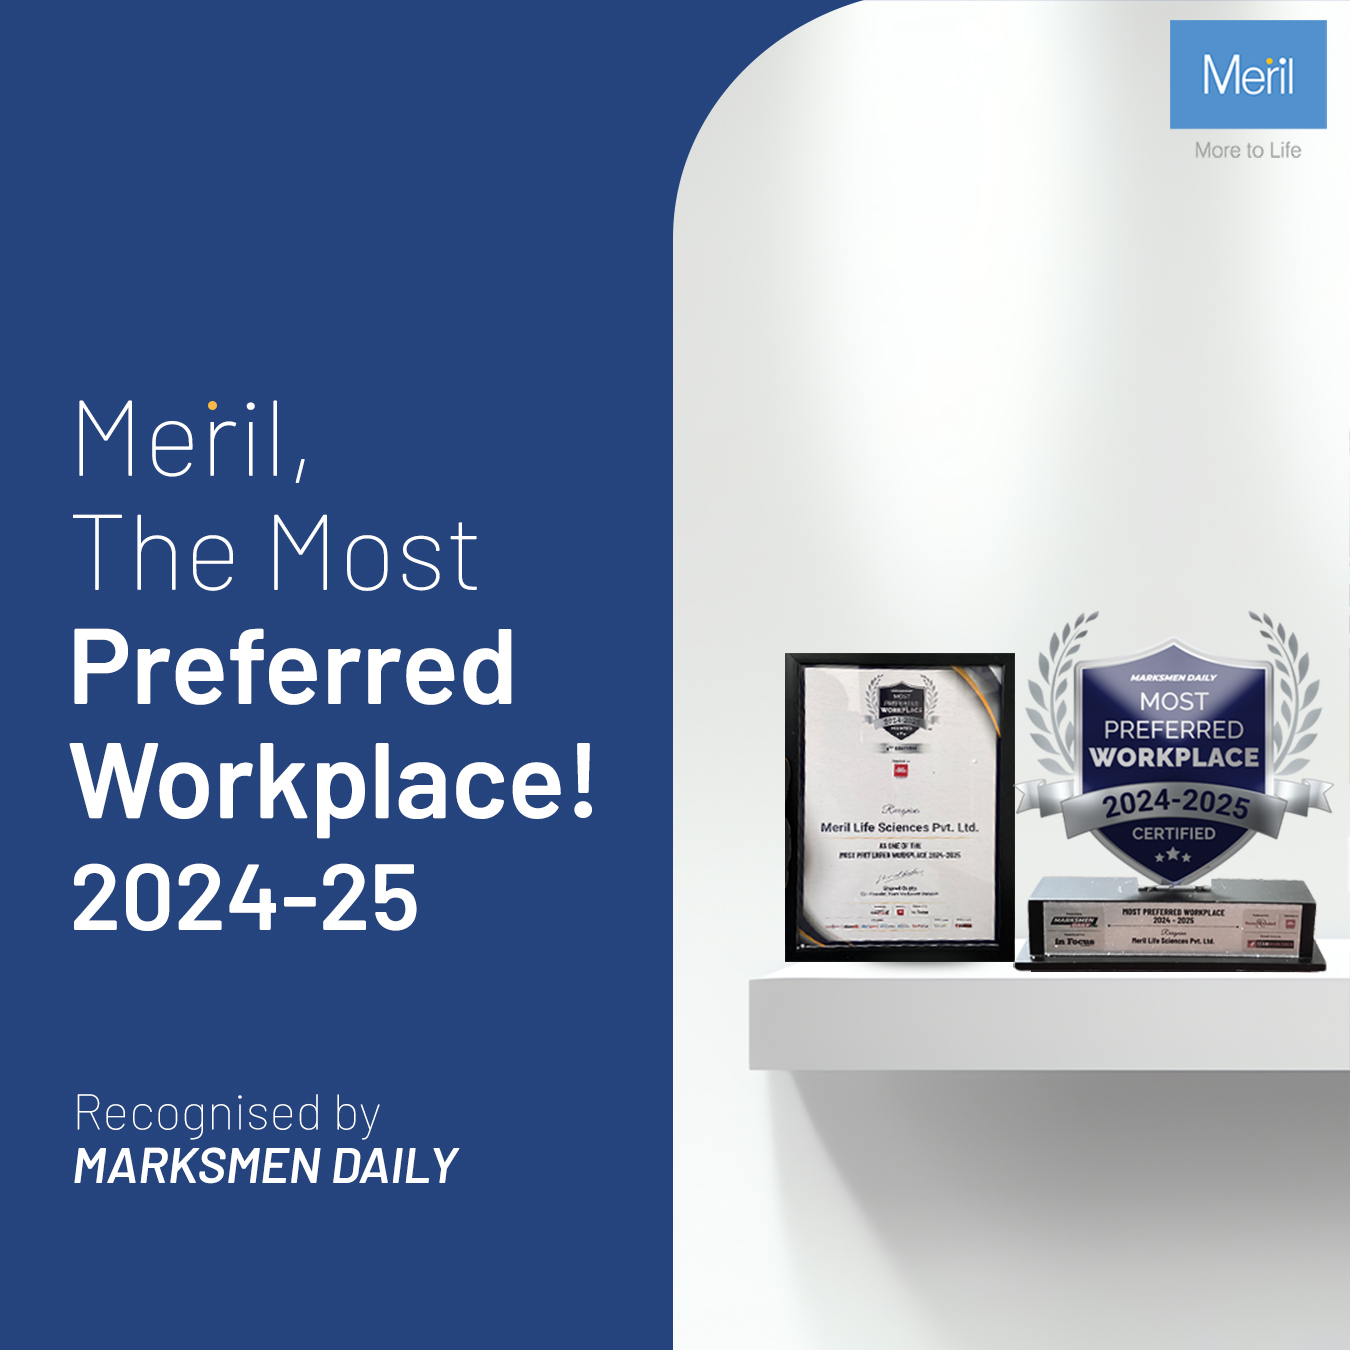 Meril is honored to receive the Most Preferred Workplace Award 2024-2025